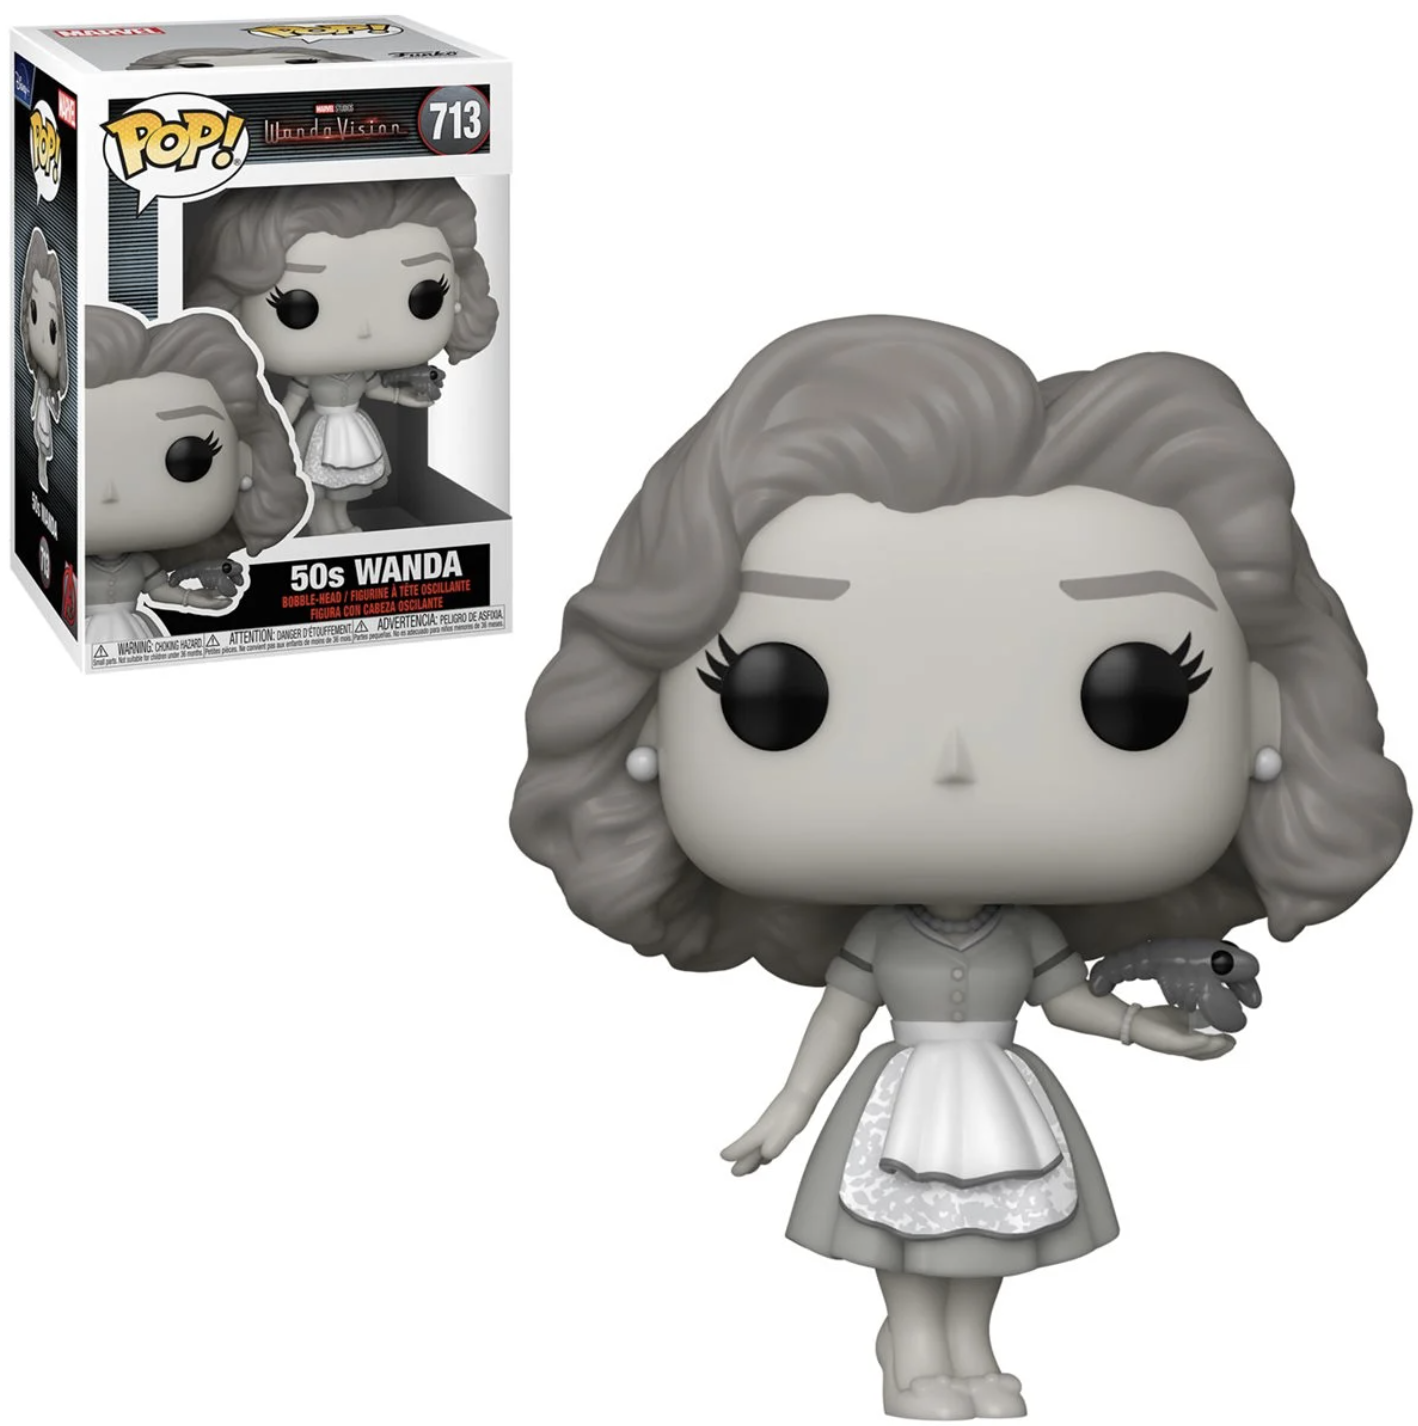 New 'WandaVision' Funkos Give a Closer Look at the Mysterious Series on